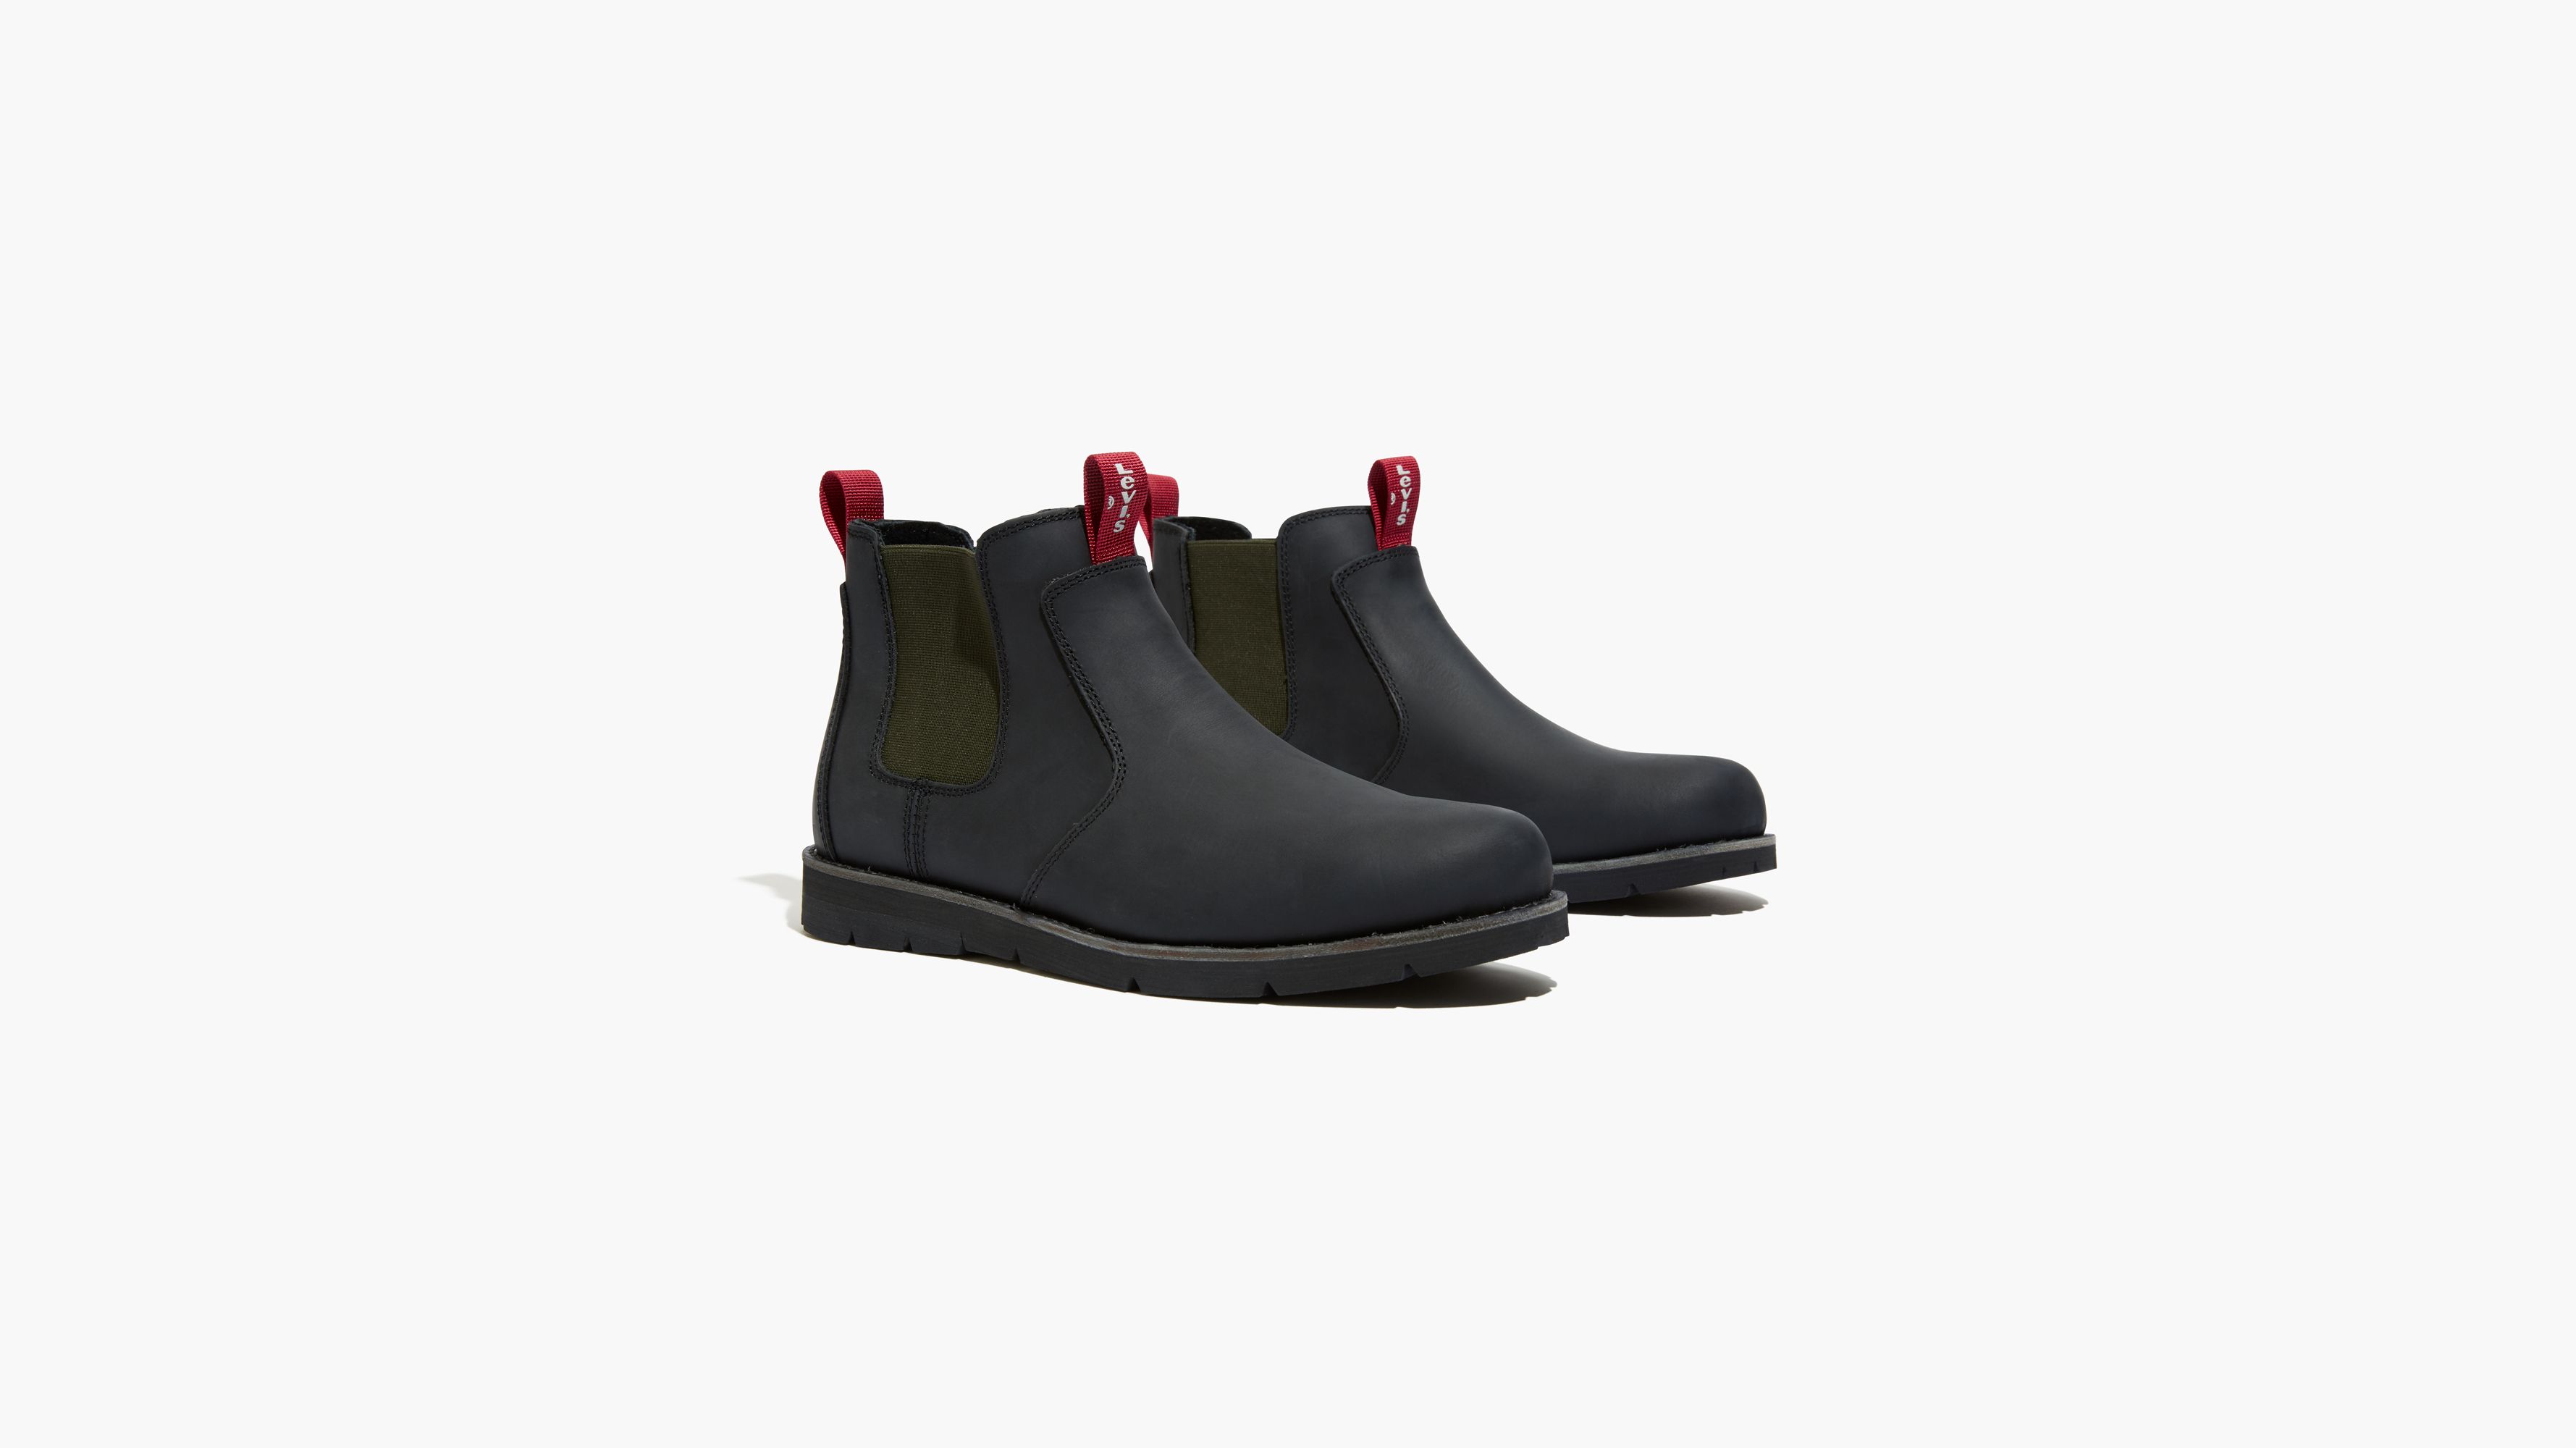 Executie hoog lading levis chelsea boots,Free delivery,www.workscom.com.br